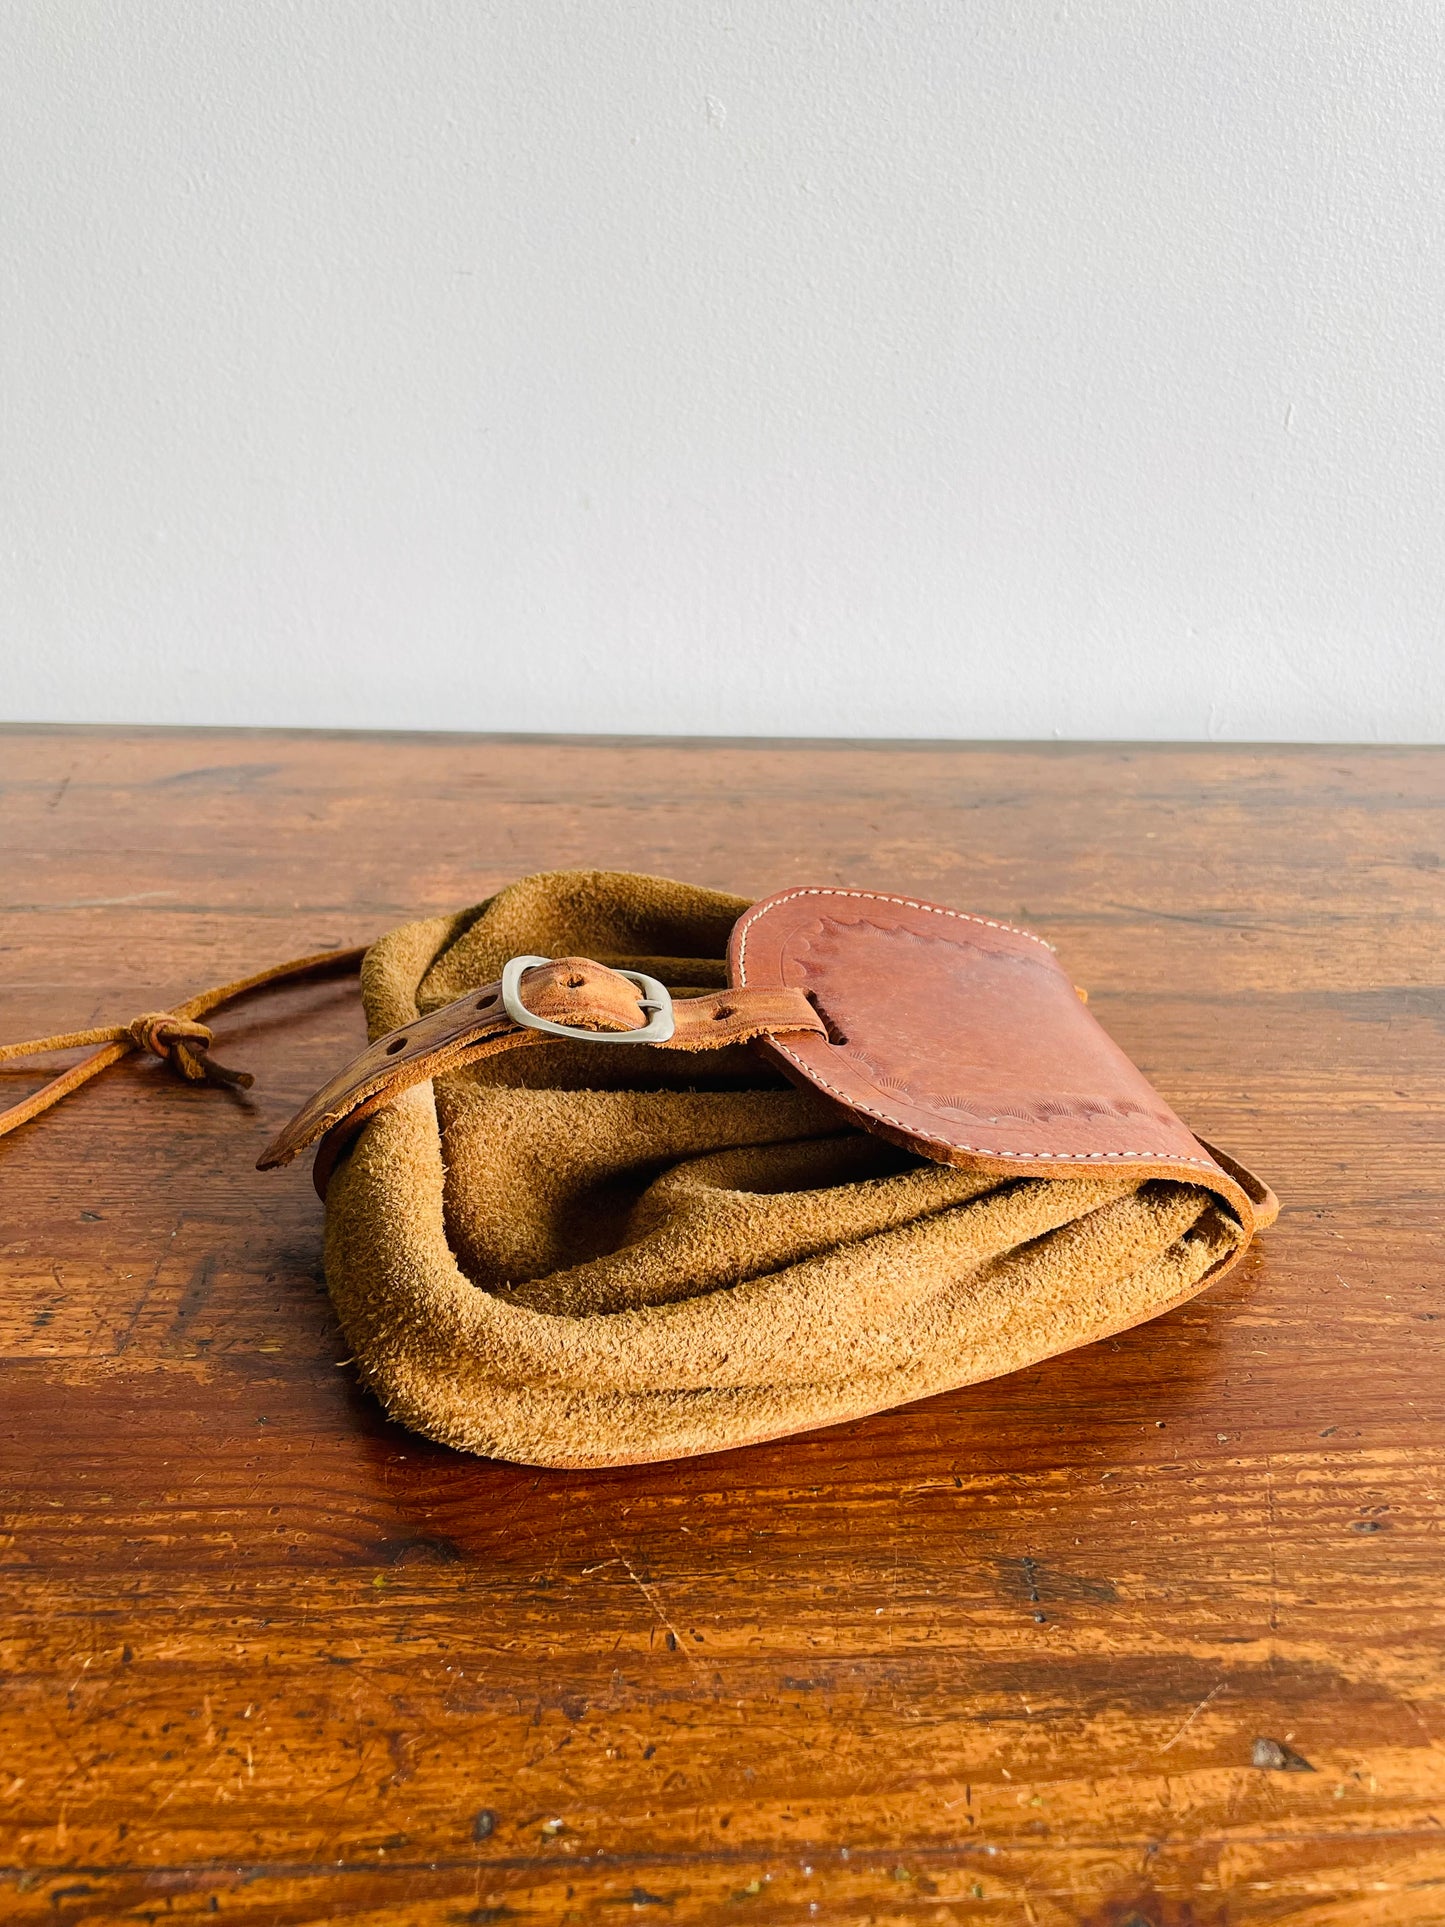 Tooled Leather & Suede Drawstring Purse